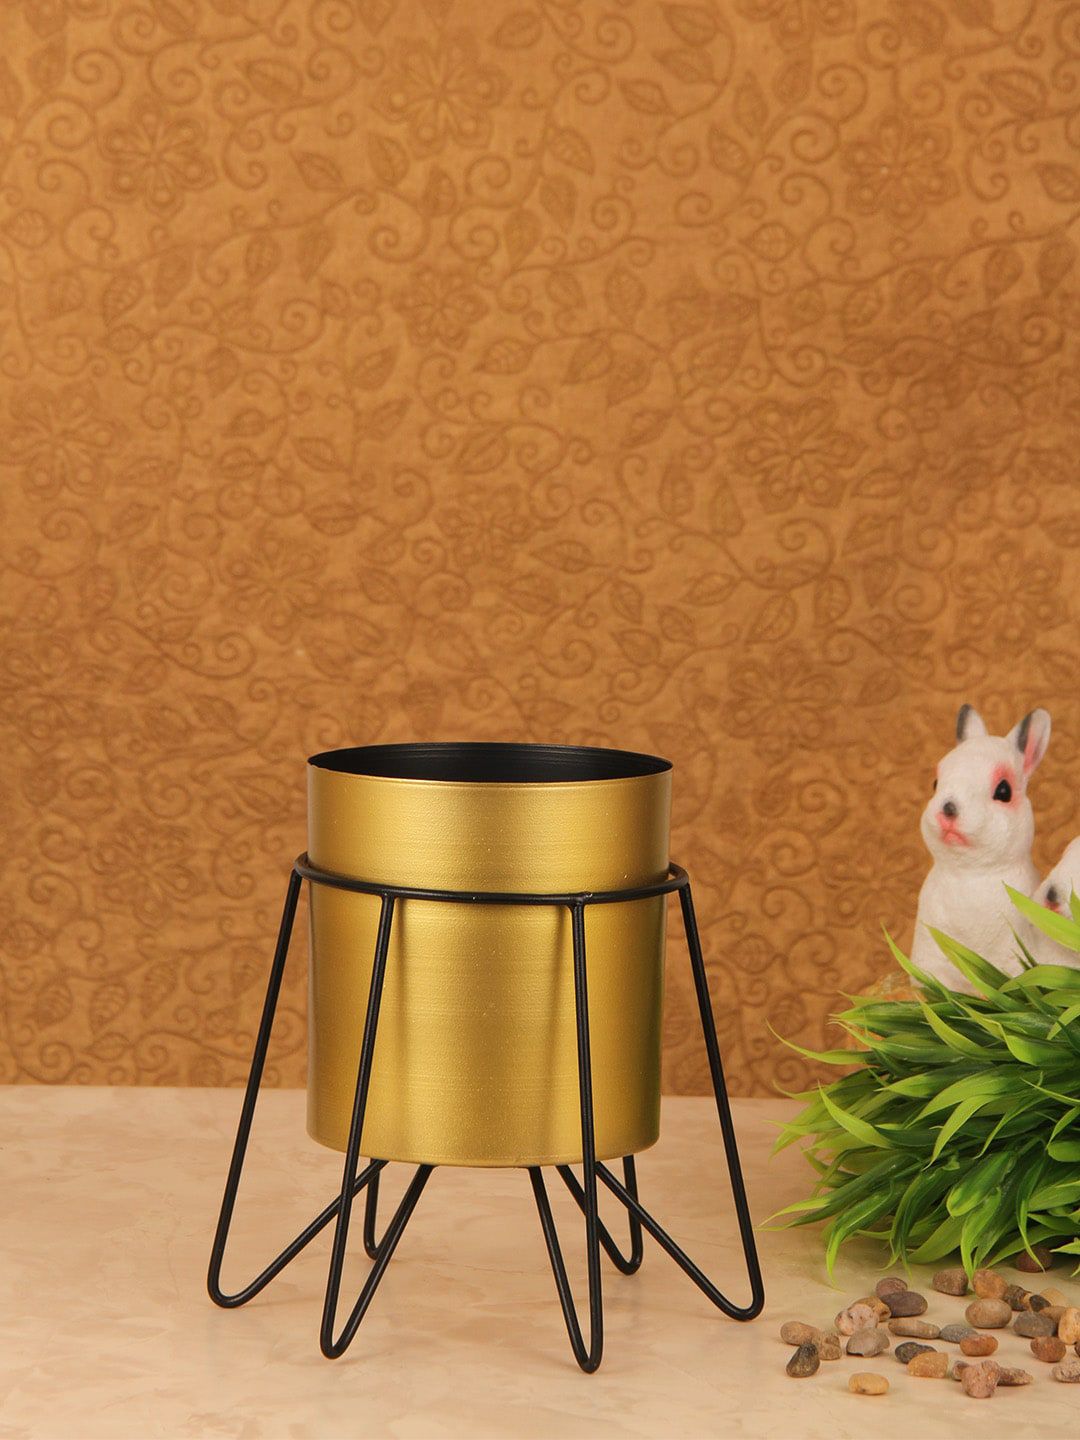 TIED RIBBONS Gold-Toned & Black Solid Metal Planter With Stand Price in India